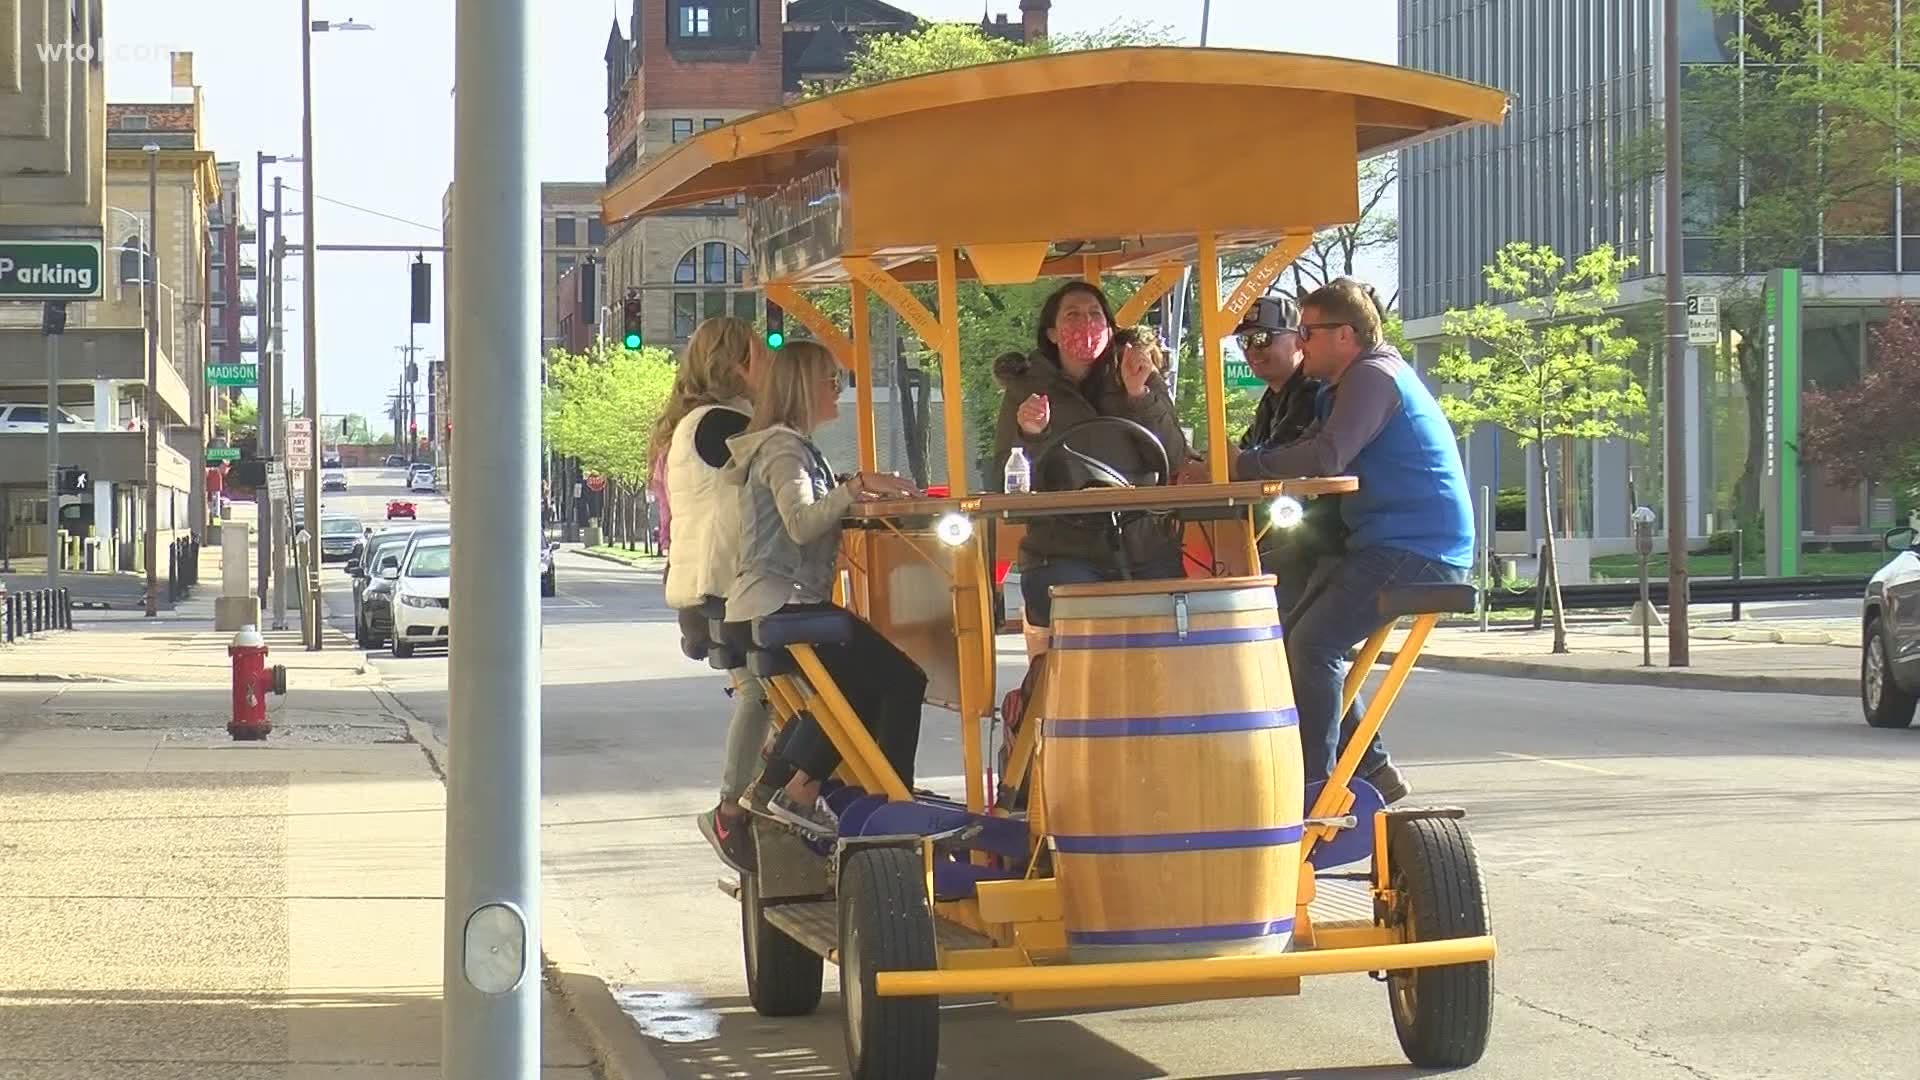 The Handlebar is back on the streets of downtown for another season of fun.